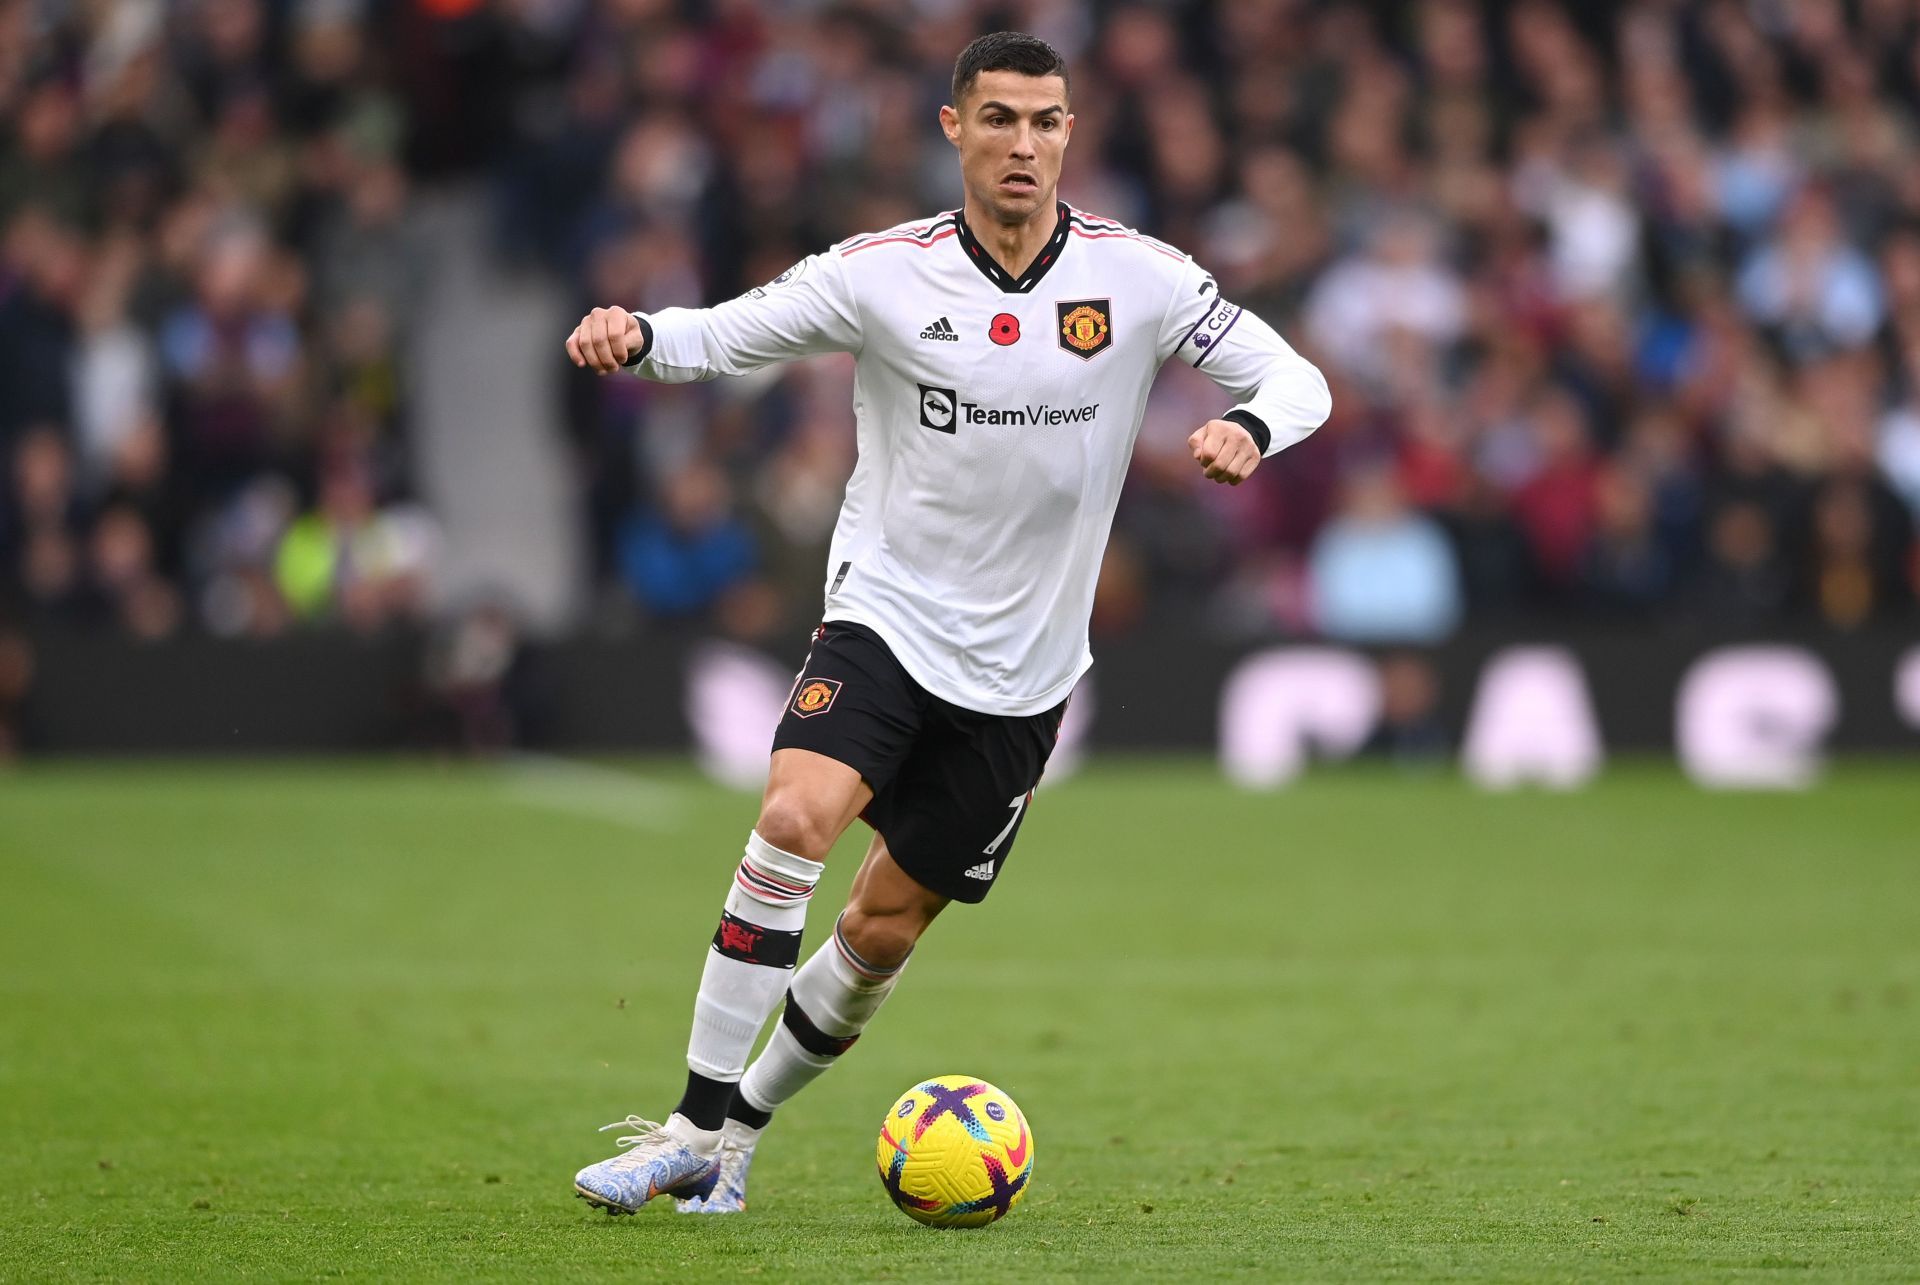 Cristiano Ronaldo has struggled for game time at Old Trafford this season.